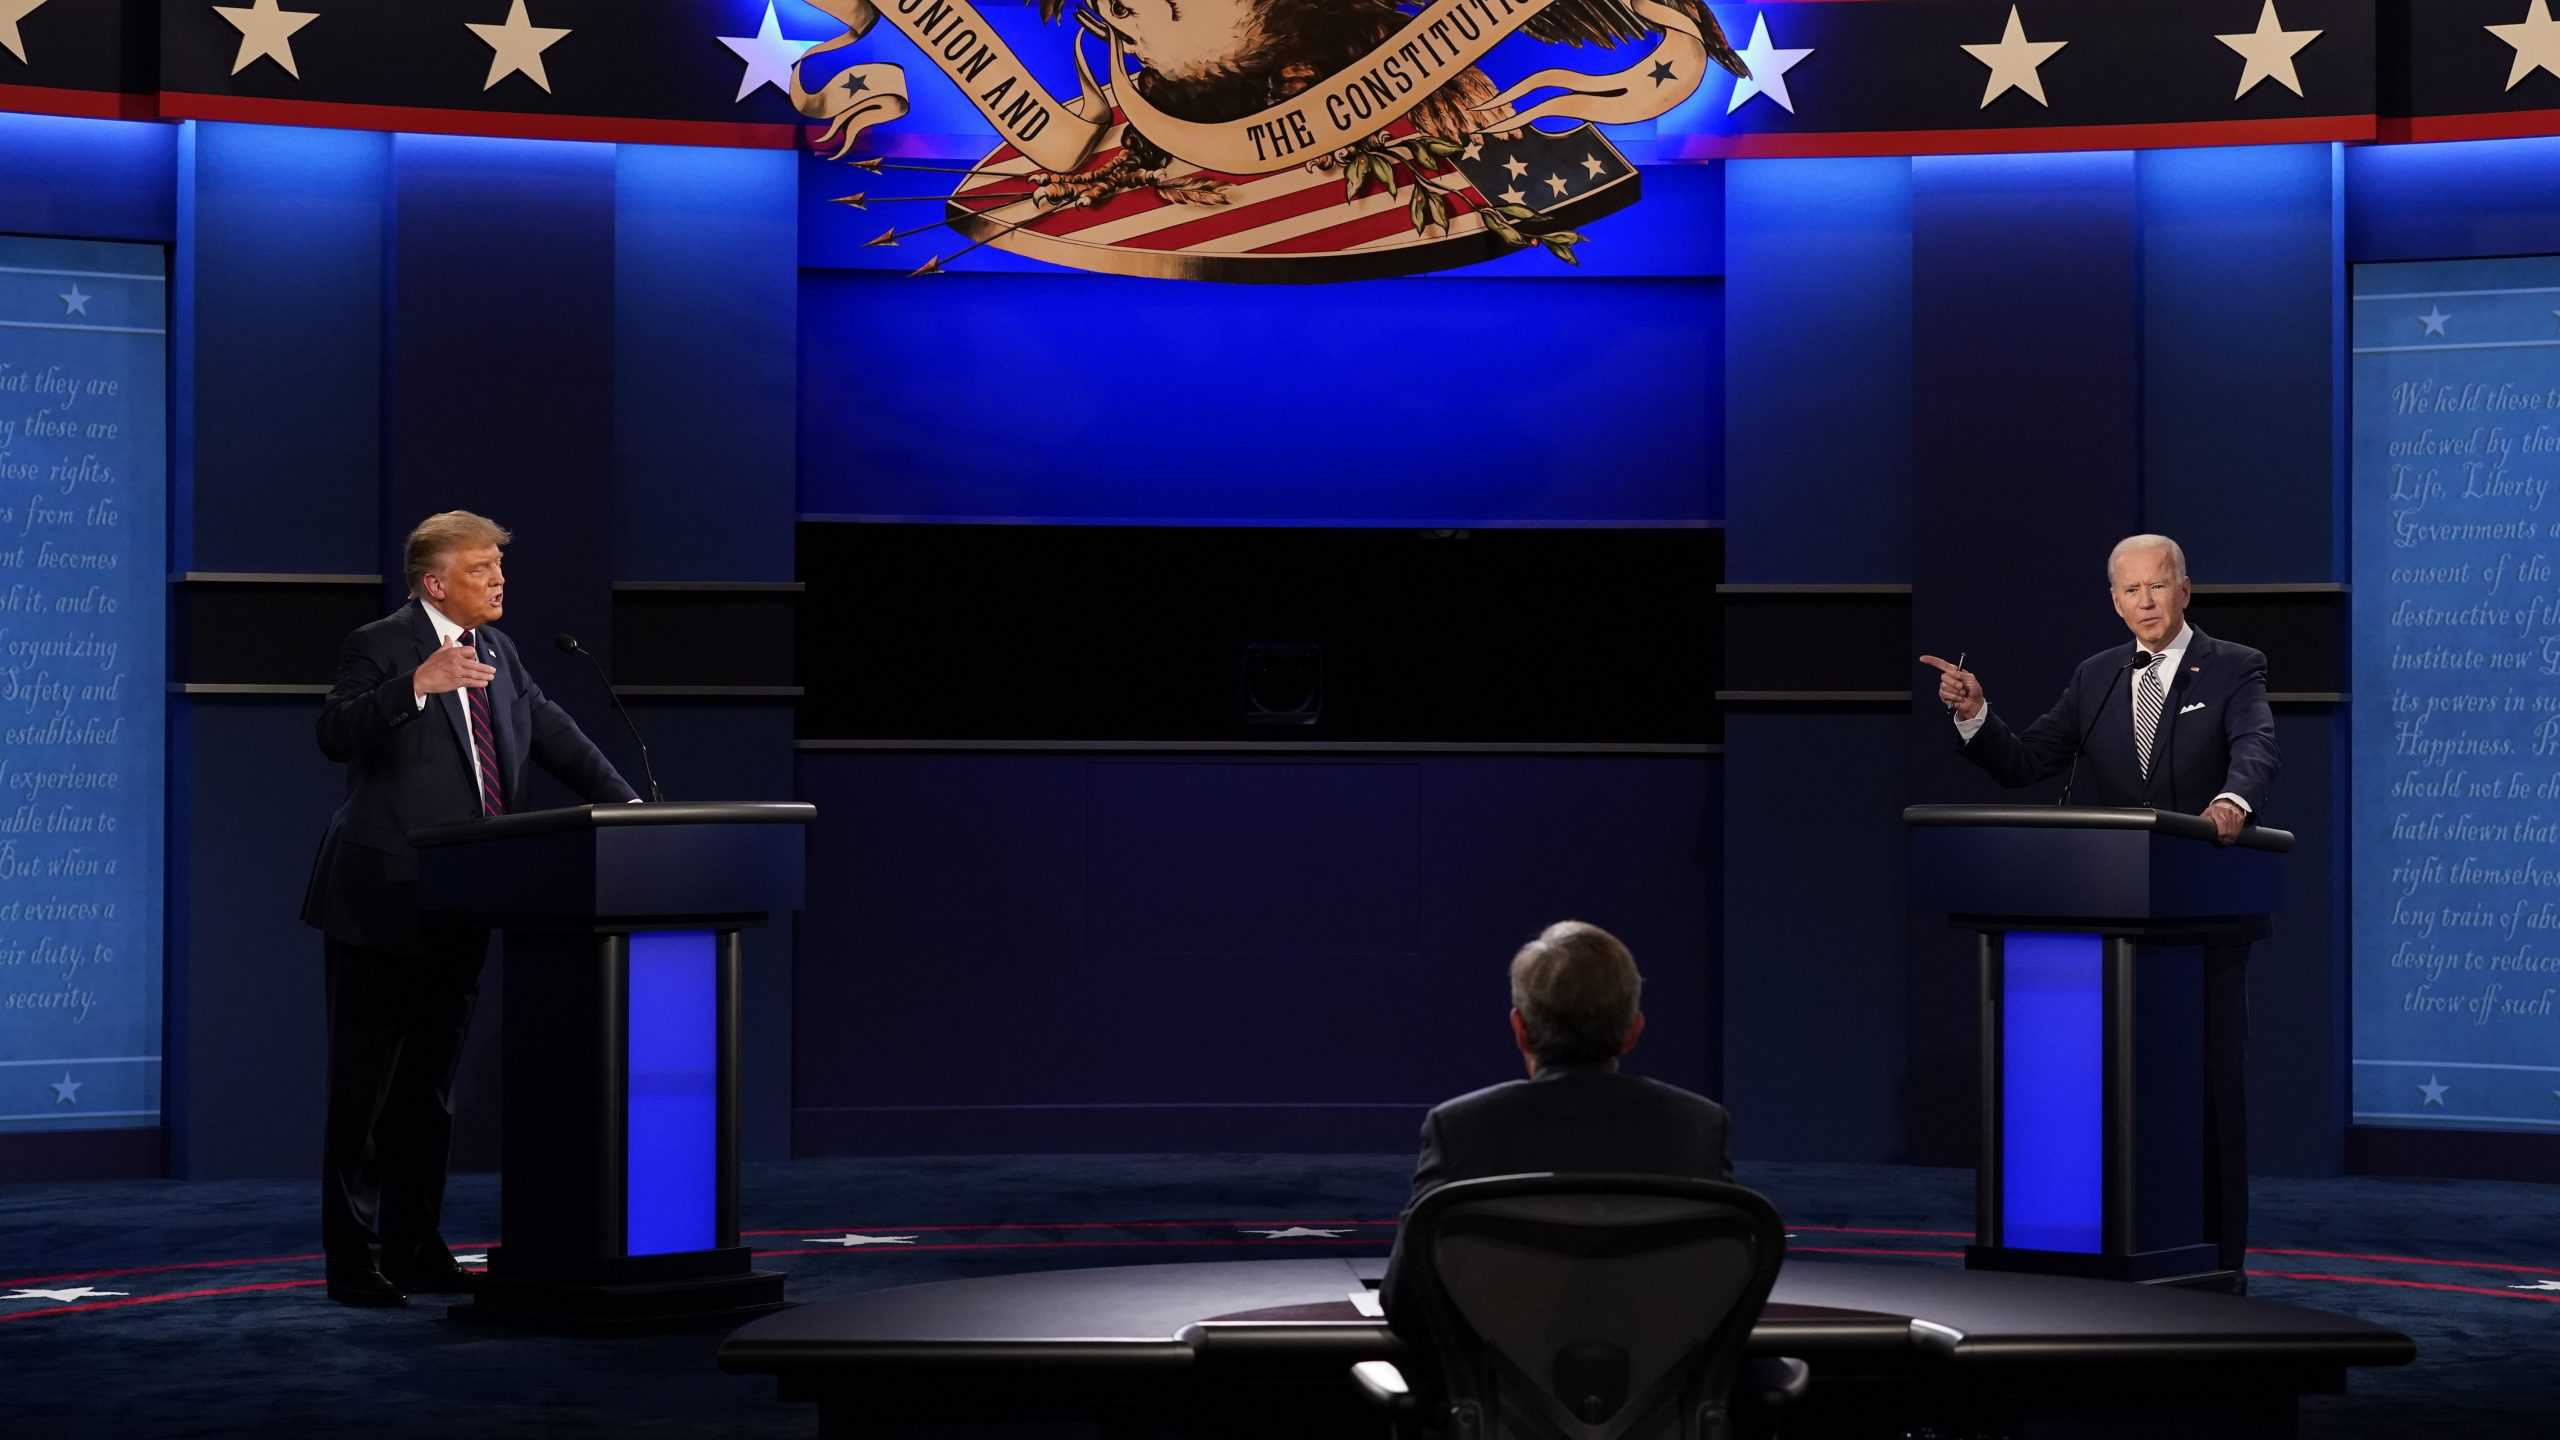 Biden masterstroke had Trump on the ropes before the debate even started